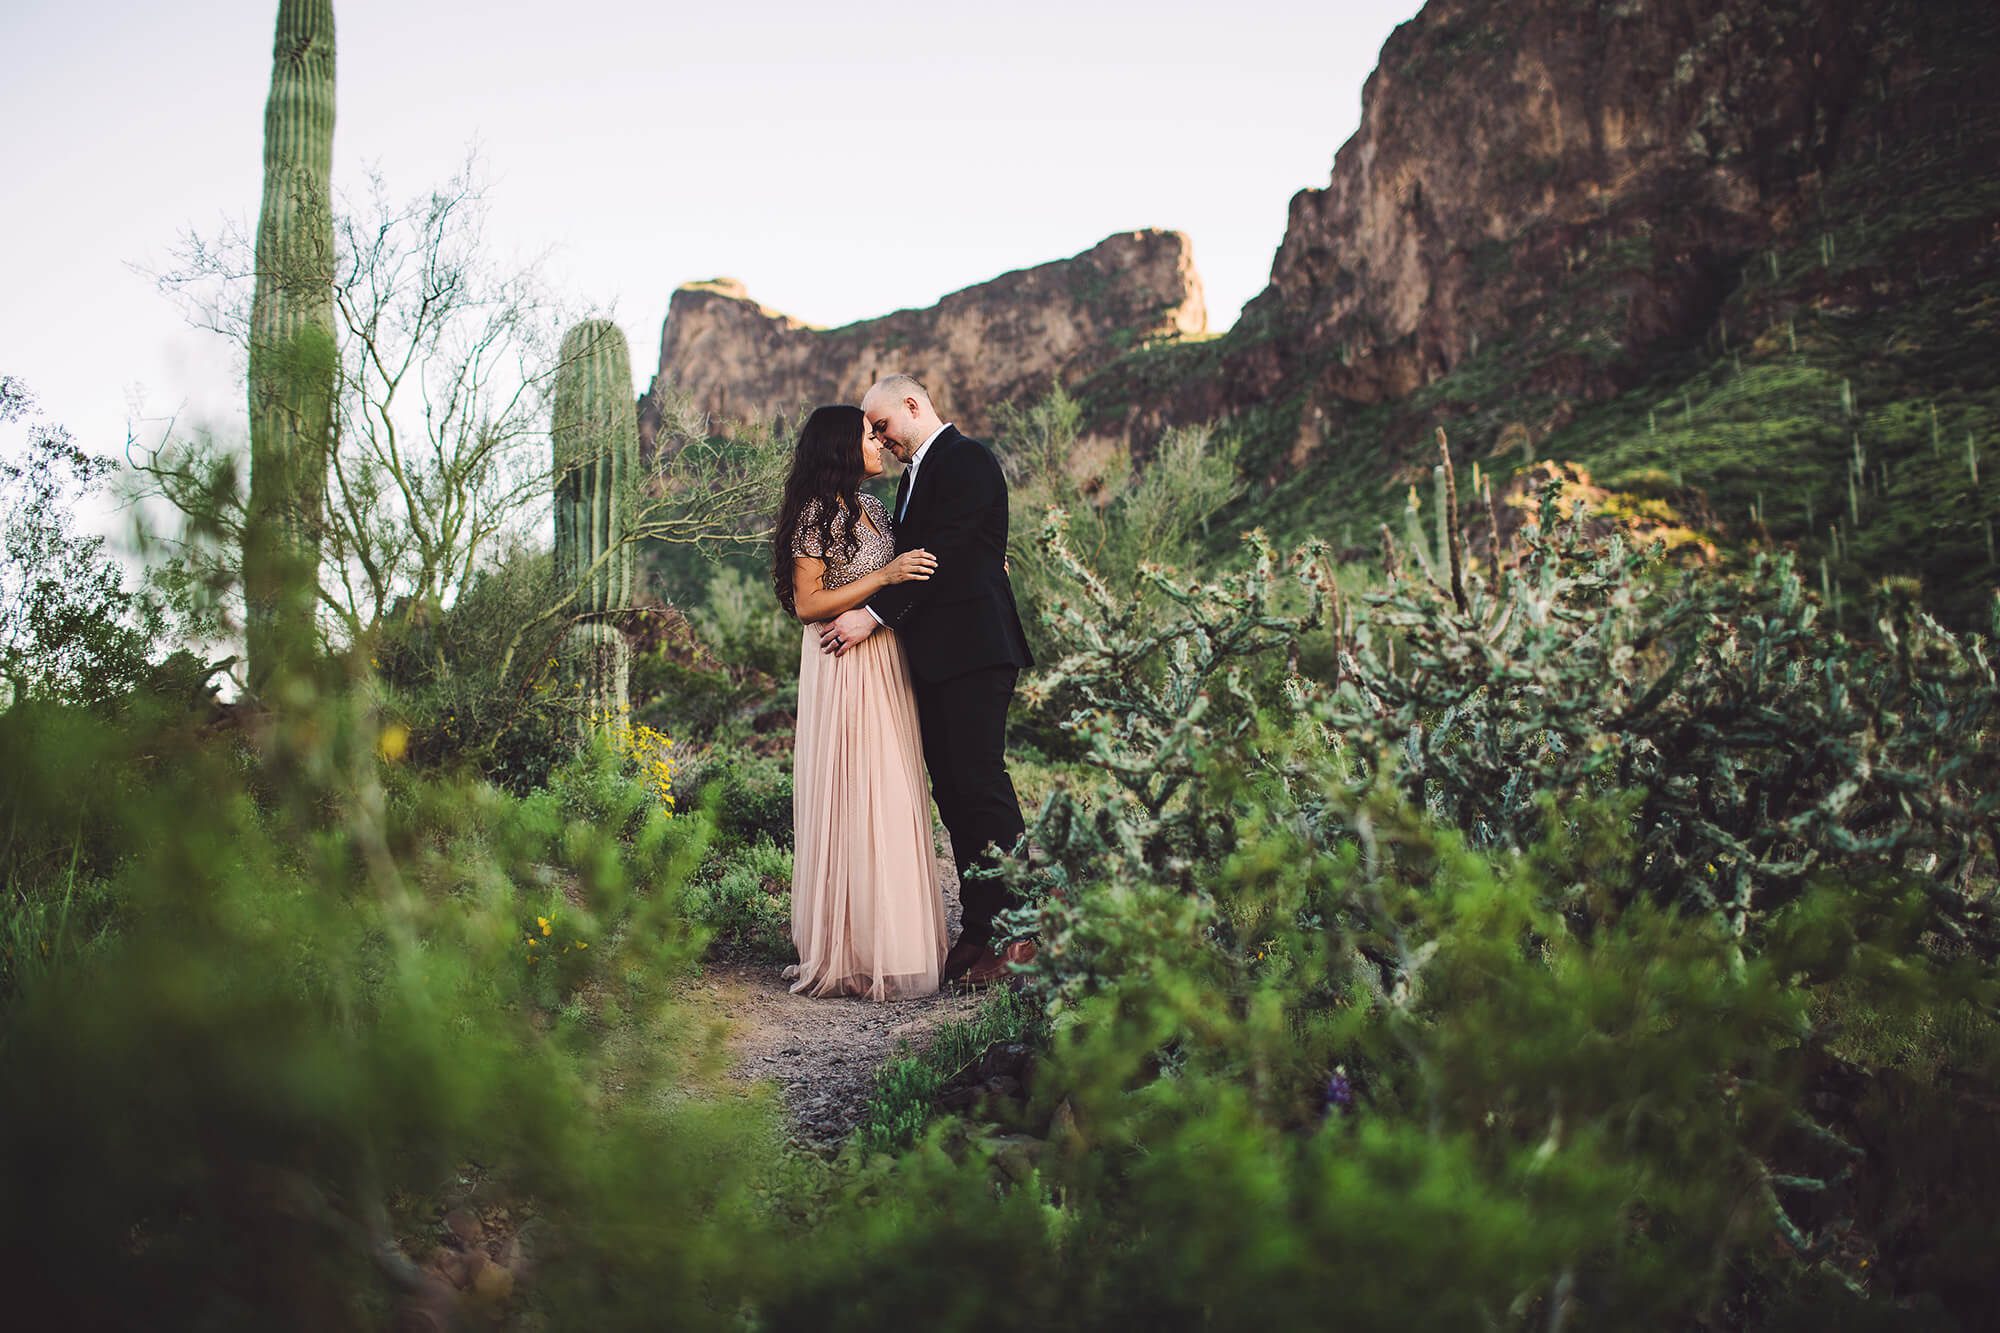 Picacho Peak in the background during the Paxman's spring couples session